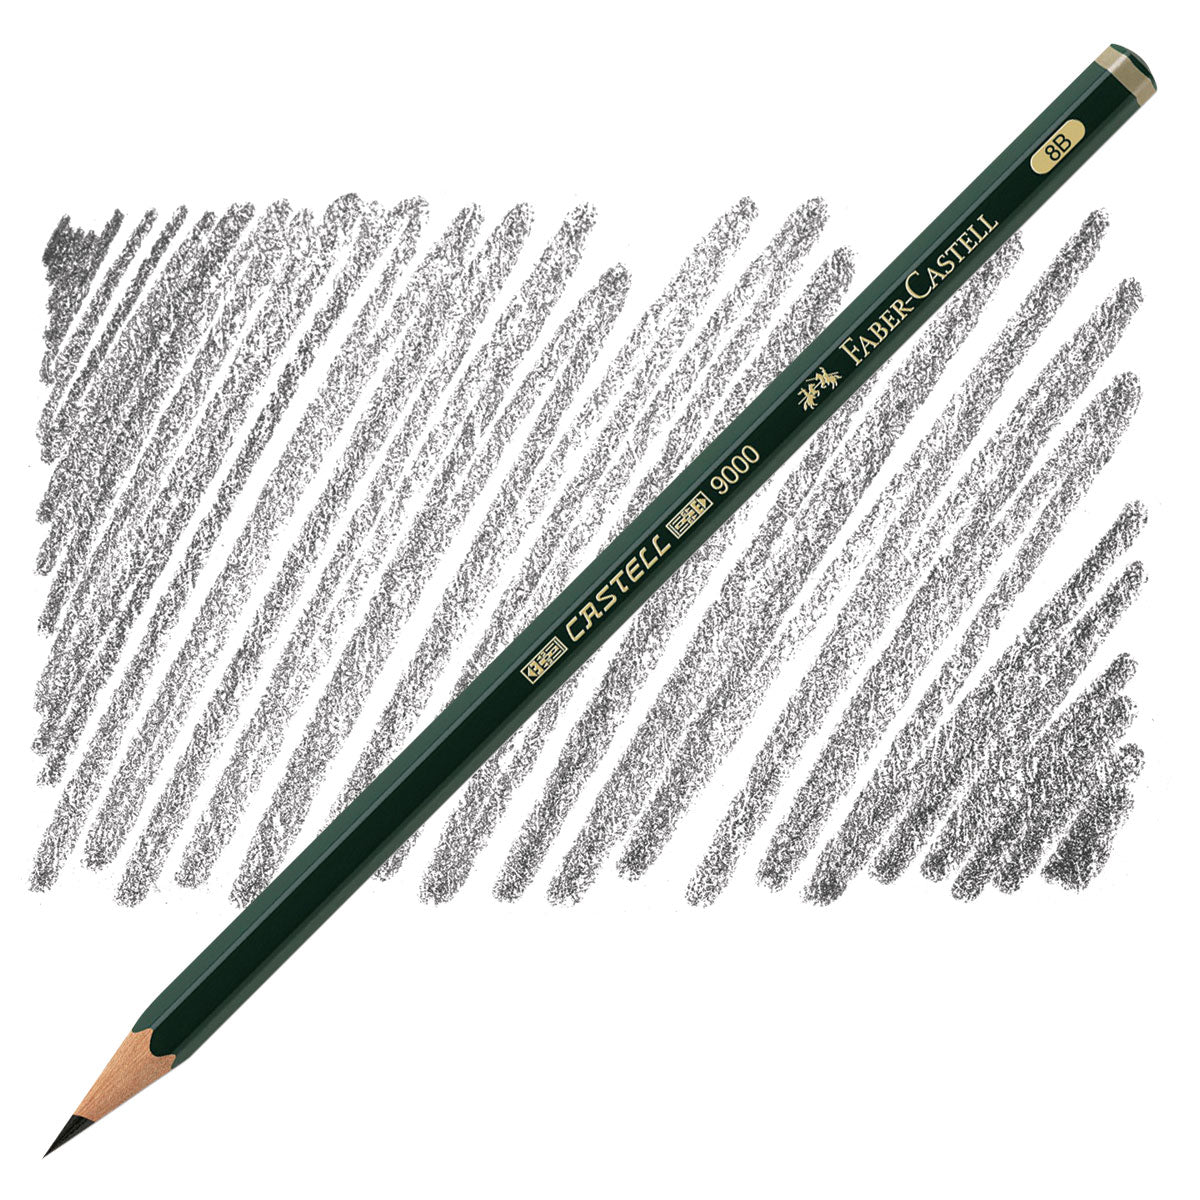 Faber Castell #8B Extra Dark Pencil - My Tools for Living℠ Retail